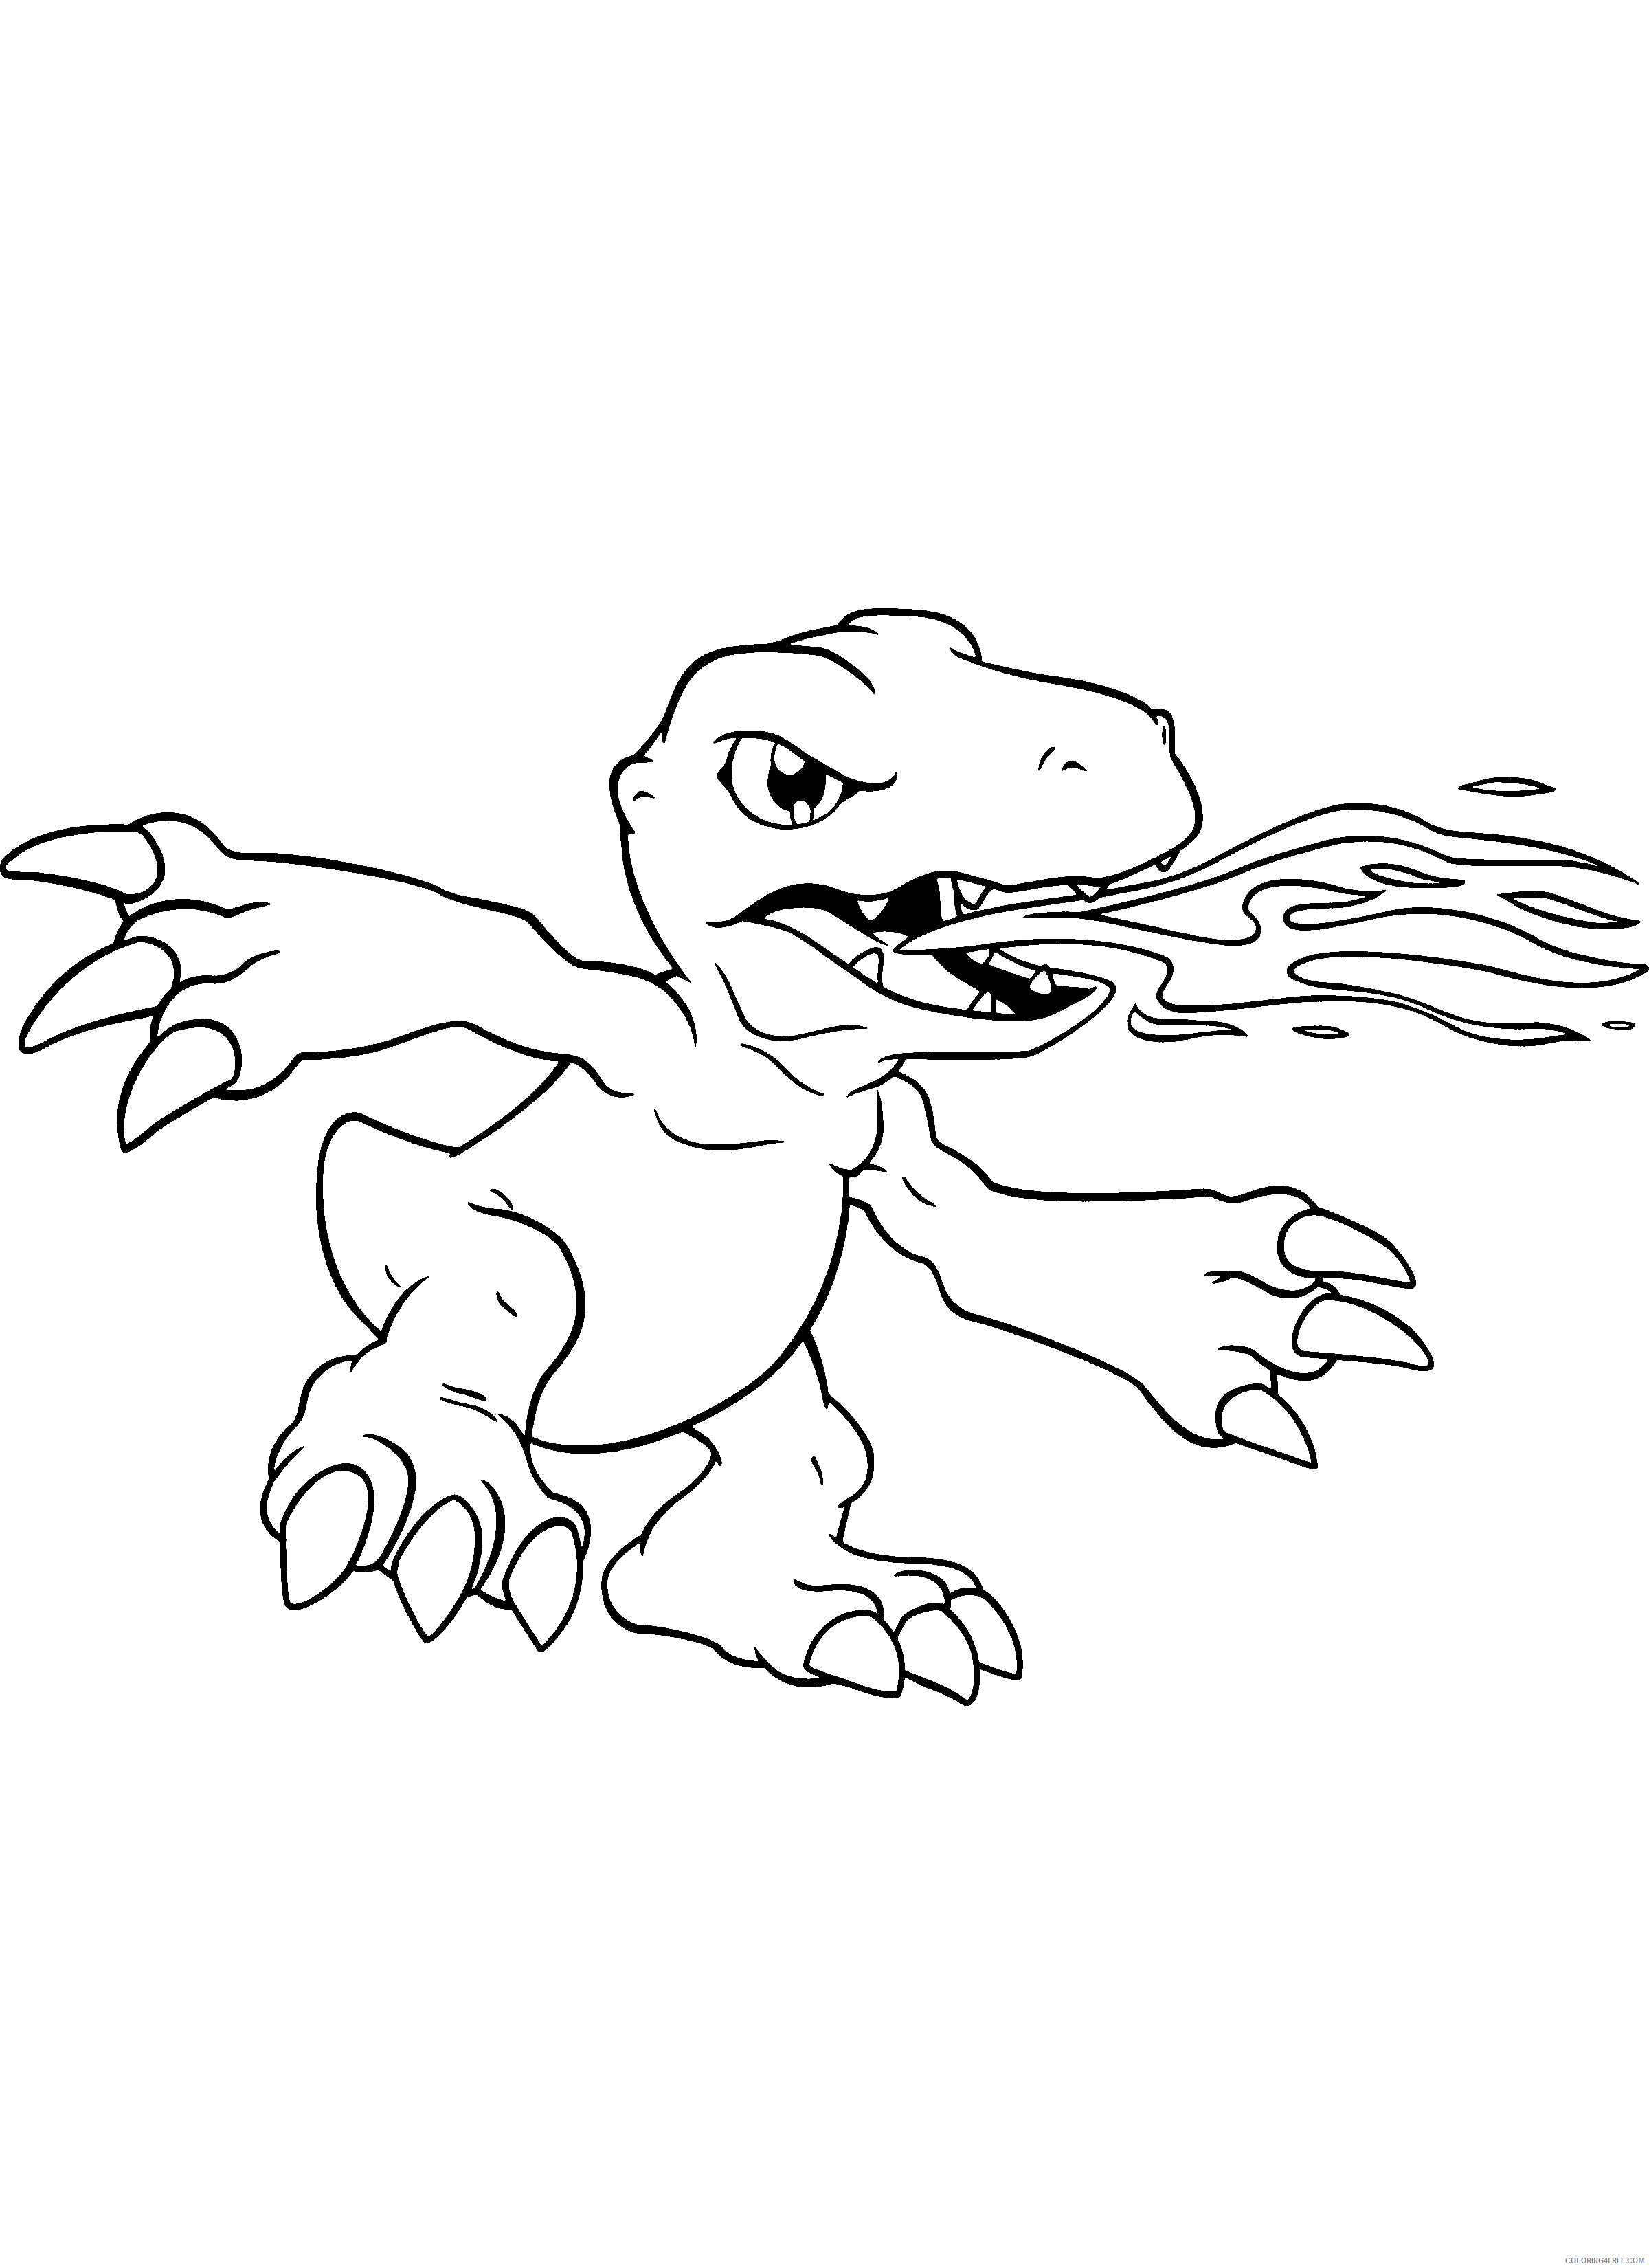 Digimon Printable Coloring Pages Anime digimon 247 2021 0329 Coloring4free